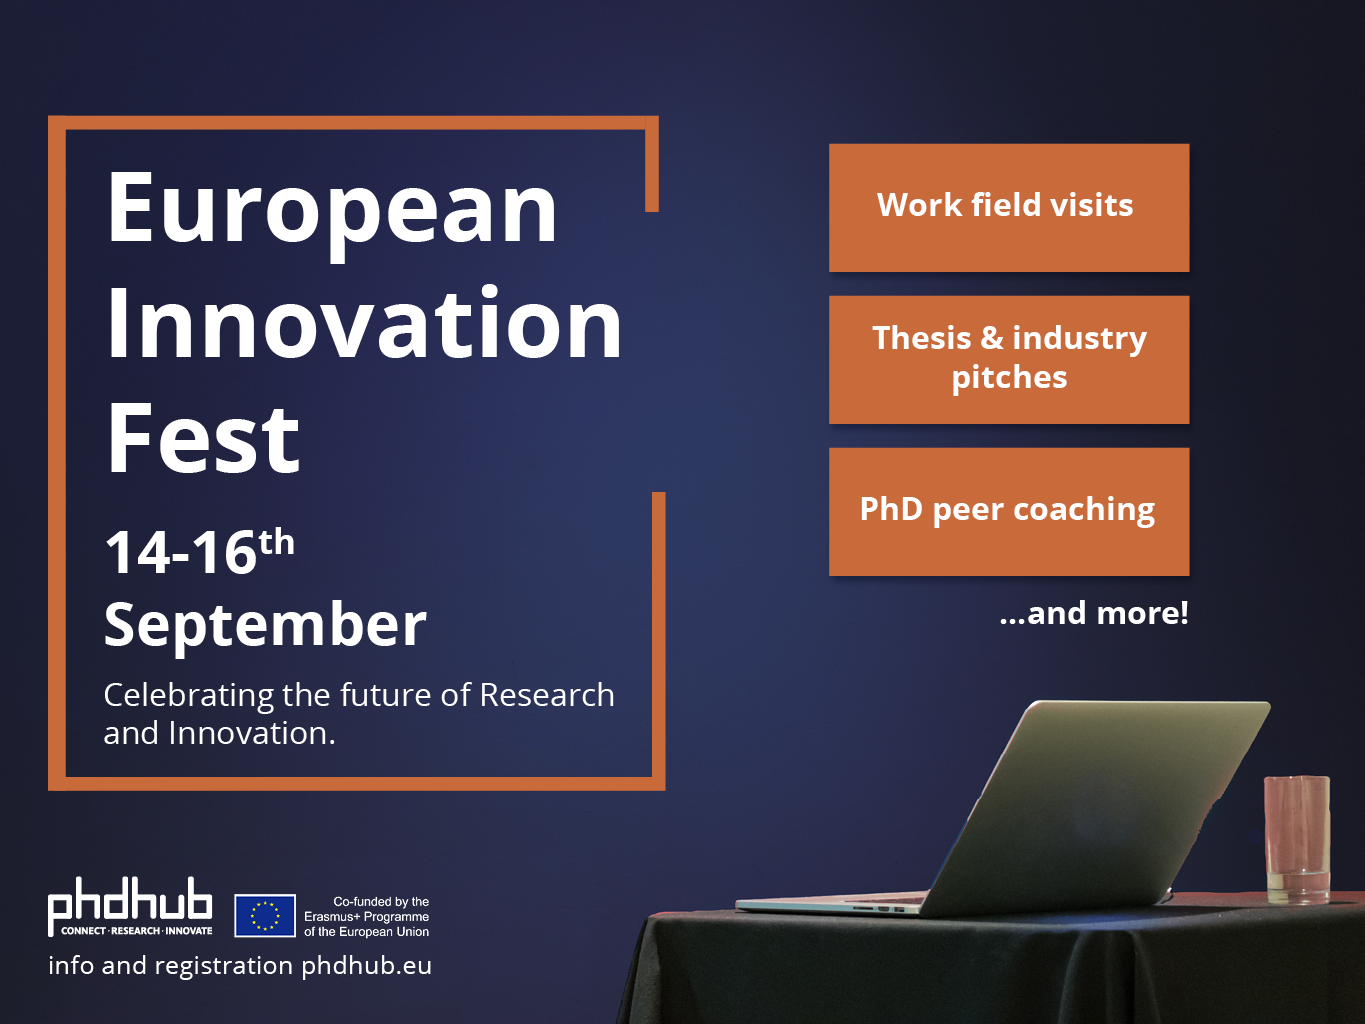 European Innovation Fest, 14-16 September: Celebrate the future of research and innovation